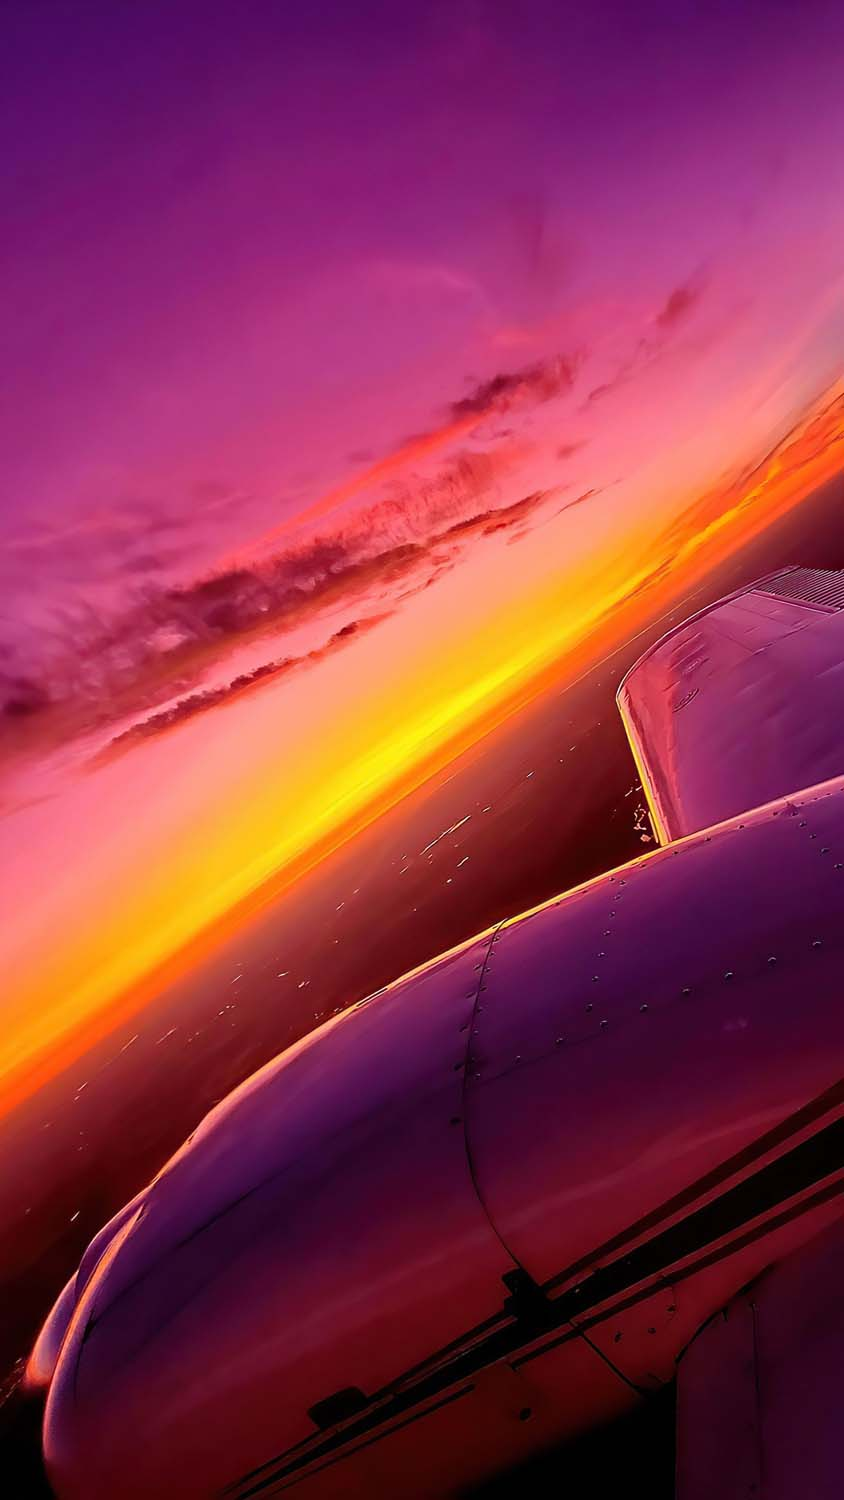 Synthwave Sunset Plane View IPhone Wallpaper HD  IPhone Wallpapers